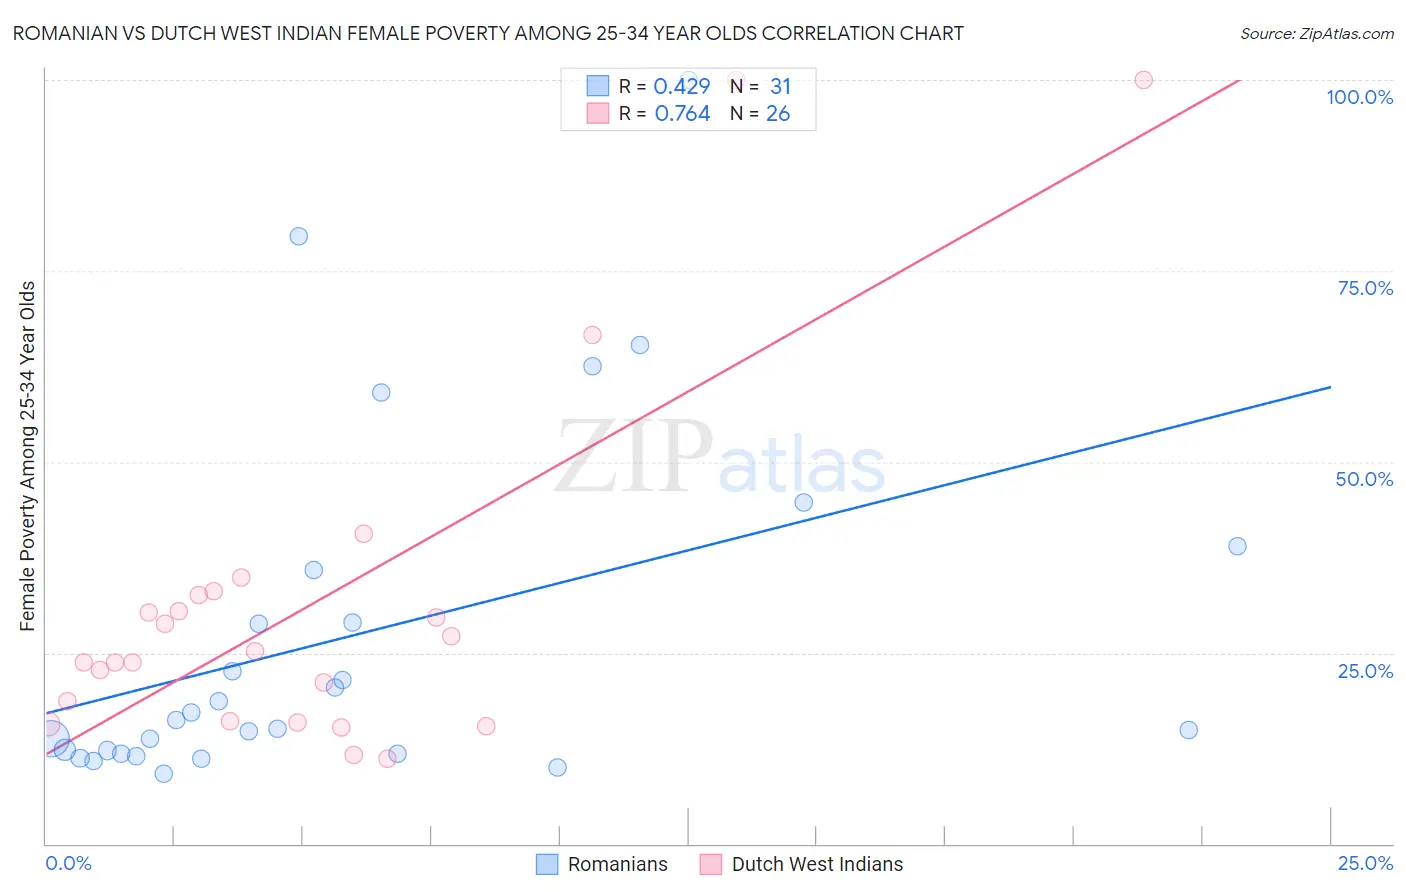 Romanian vs Dutch West Indian Female Poverty Among 25-34 Year Olds